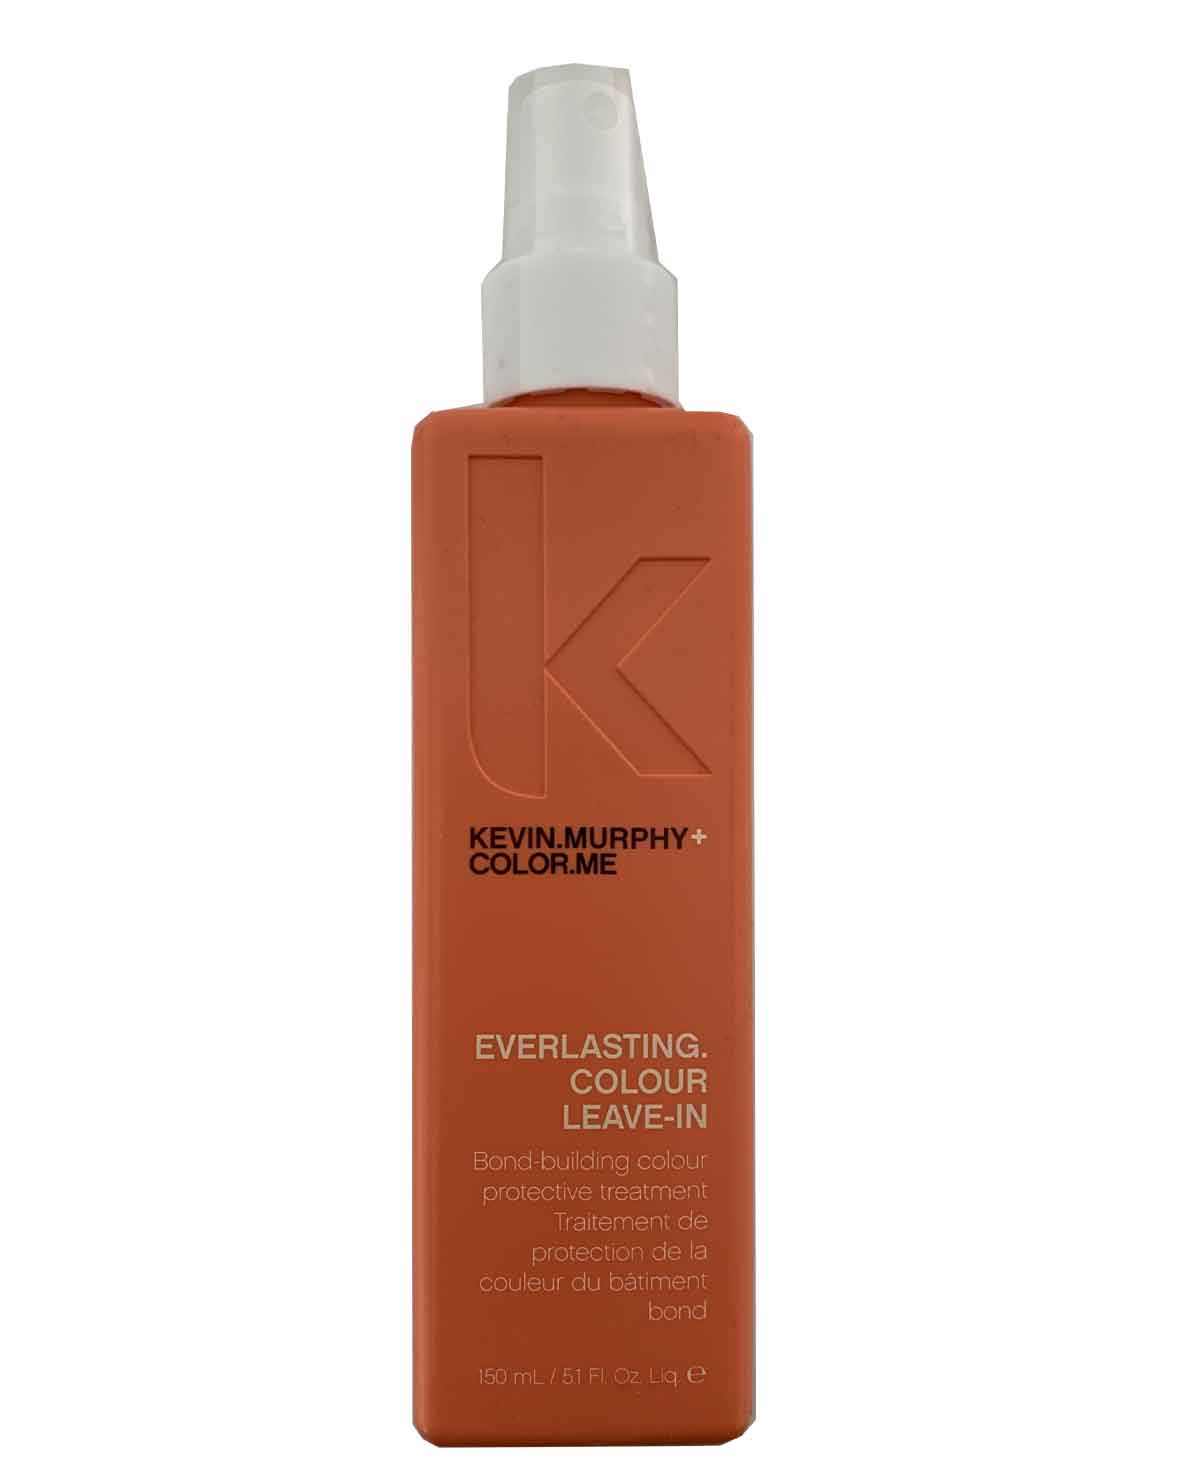 Kevin.Murphy EVERLASTING.COLOUR LEAVE-IN TREATMENT 150ml